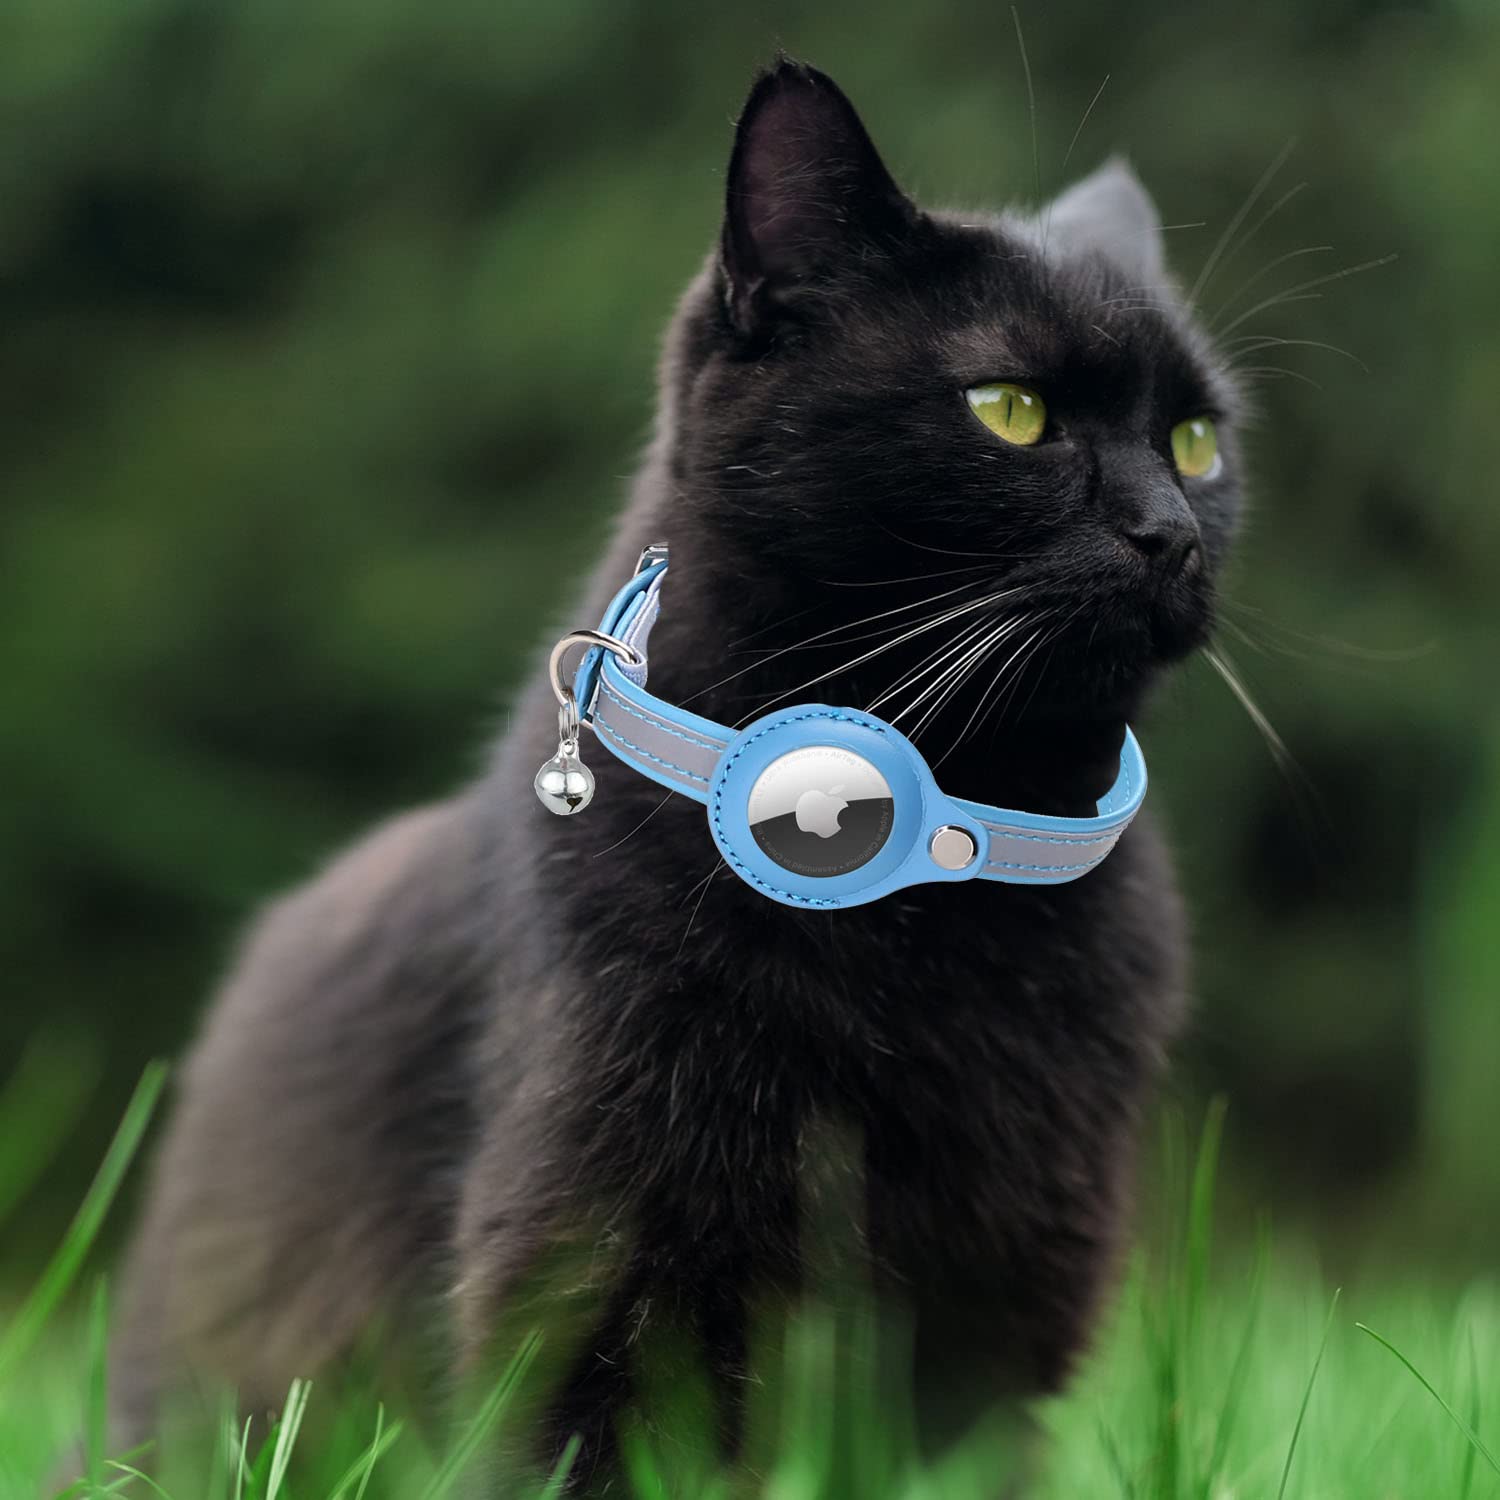 WAPSAT Airtag Cat Collar, Cat Collar with Bells, Reflective GPS Cat Collar, Anti-Lost Cat Tracker Collar Adjustable Leather Cat Collar for Boy Girl Cats or Small Dogs, Kittens and Puppies (S, Blue)